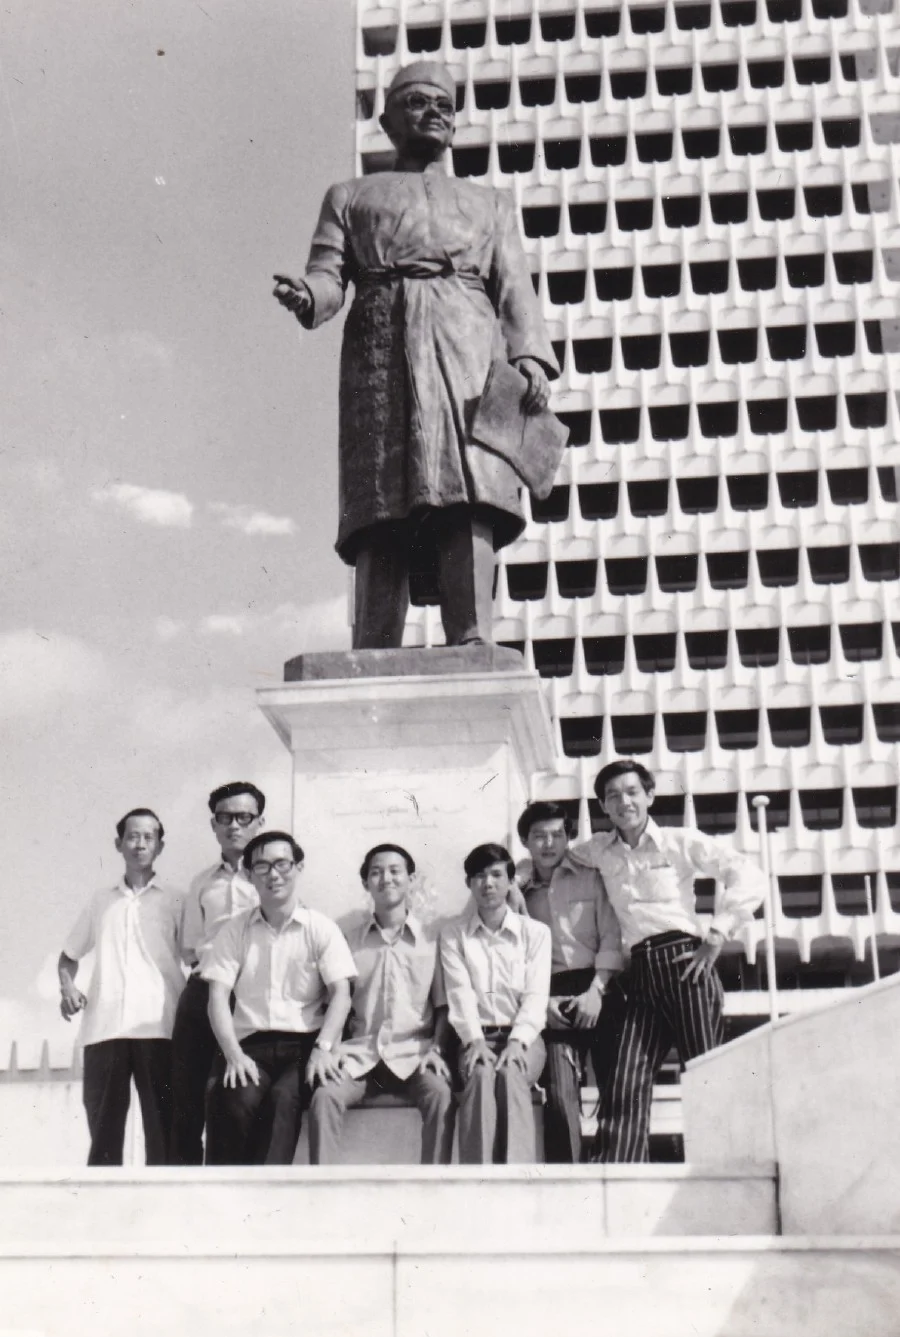 The statue of Tunku Abdul Rahman was unveiled in 1971